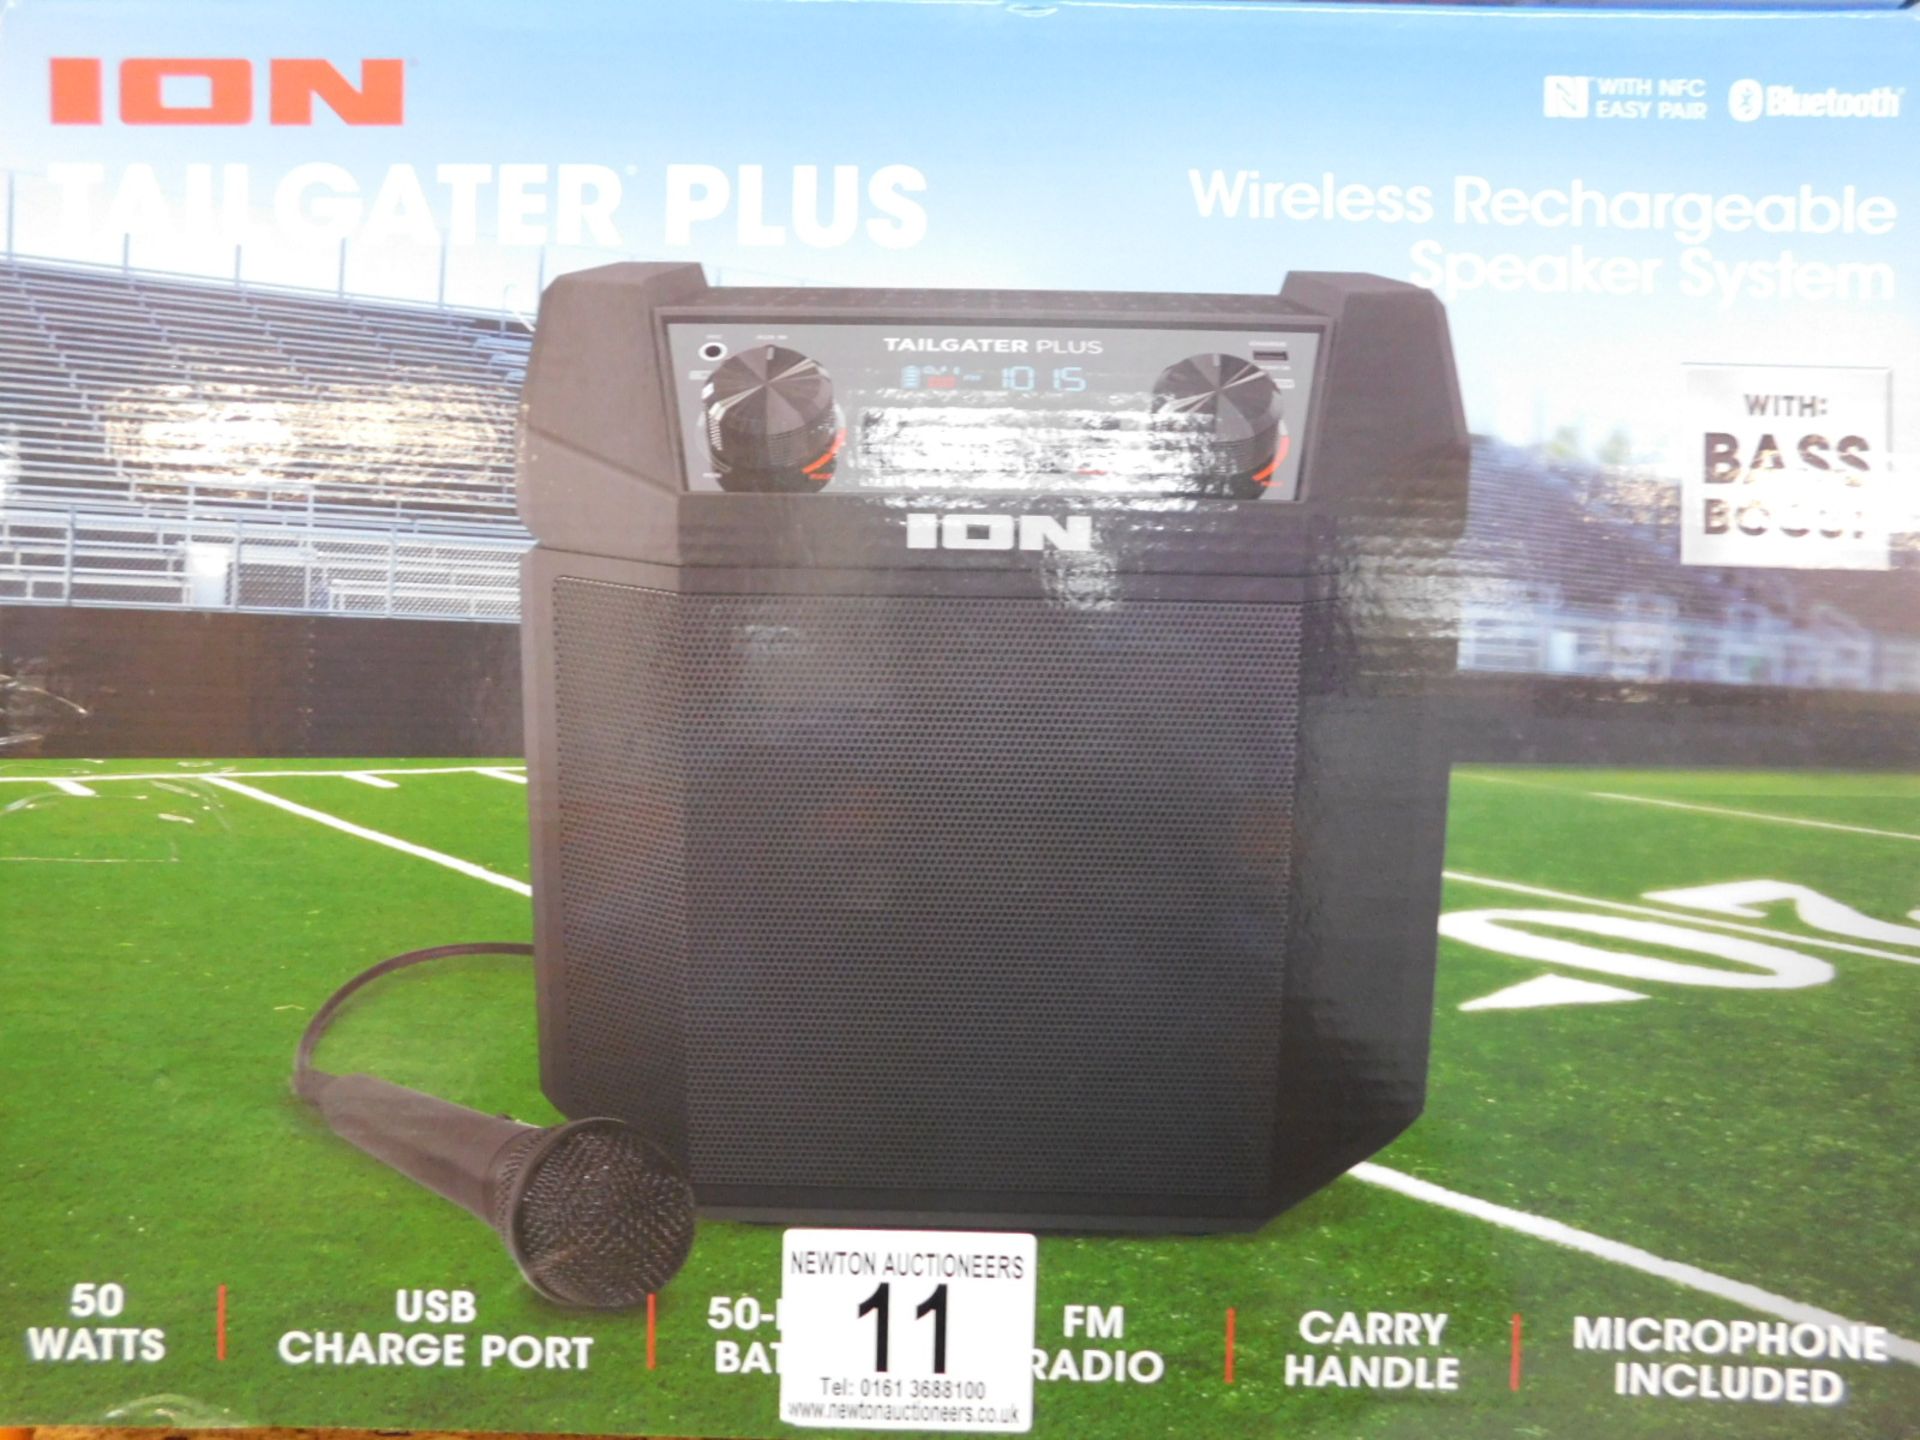 1 BOXED ION TAILGATER PLUS WIRELESS RECHARGEABLE PORTABLE SPEAKER SYSTEM RRP Â£129 (TESTED